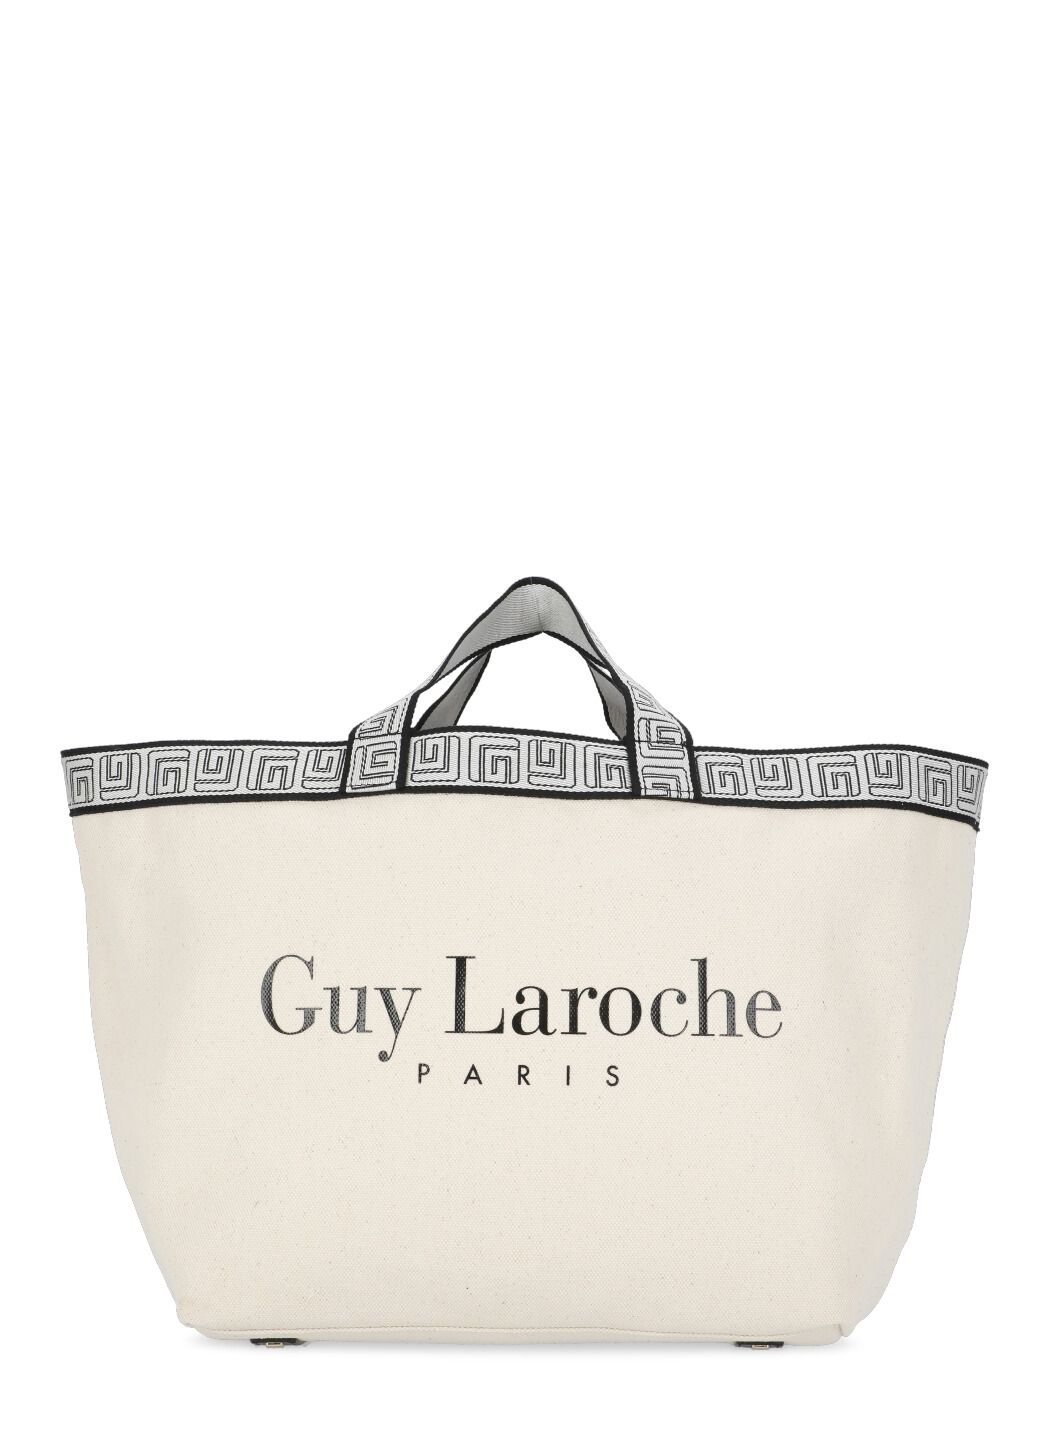 Guy Laroche bags second hand prices